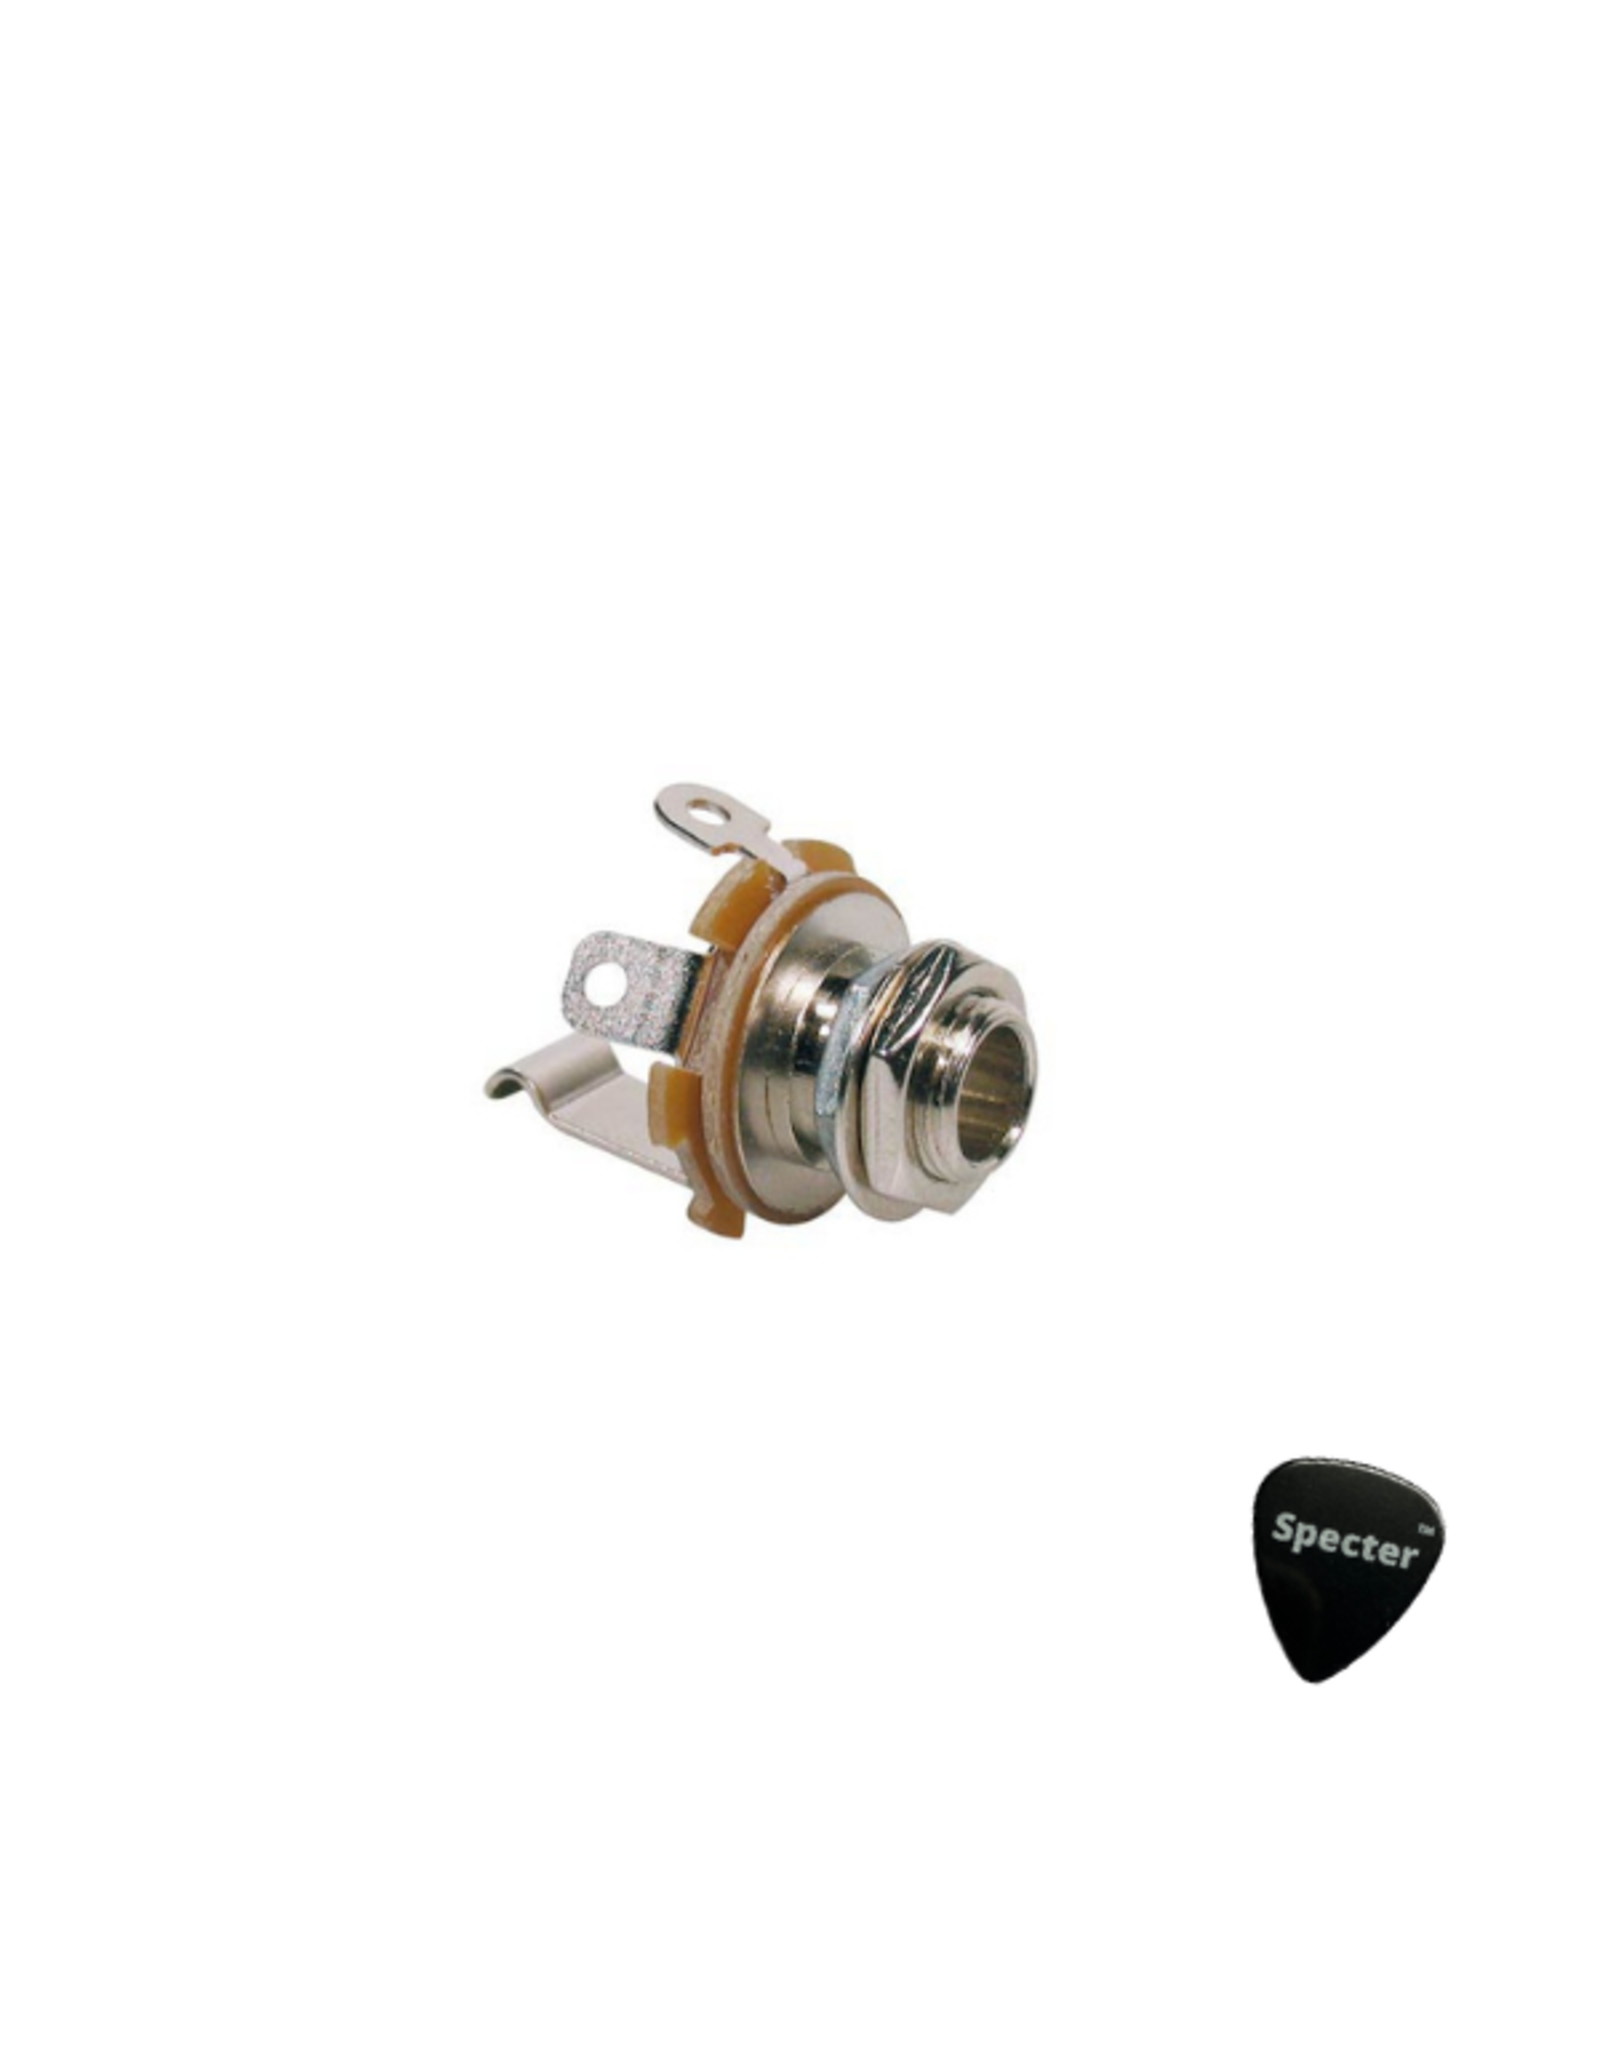 Specter Switchcraft SC-11 Chassis Connector Output Jack 2-Polig 6.3mm - Met Specter Plectrum - Copy